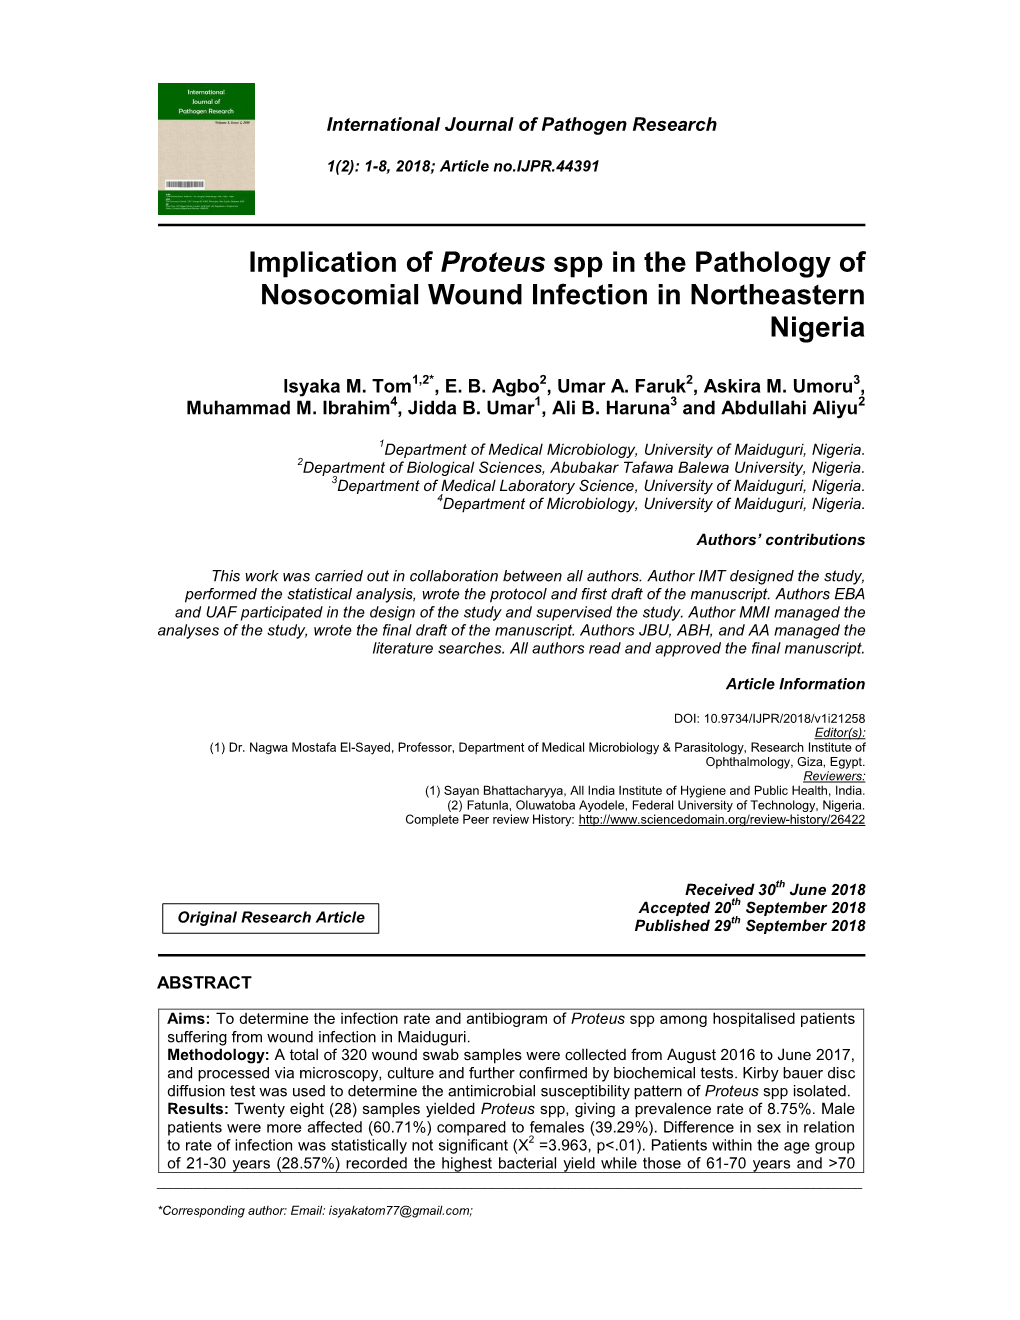 Implication of Proteus Spp in the Pathology of Nosocomial Wound Infection in Northeastern Nigeria